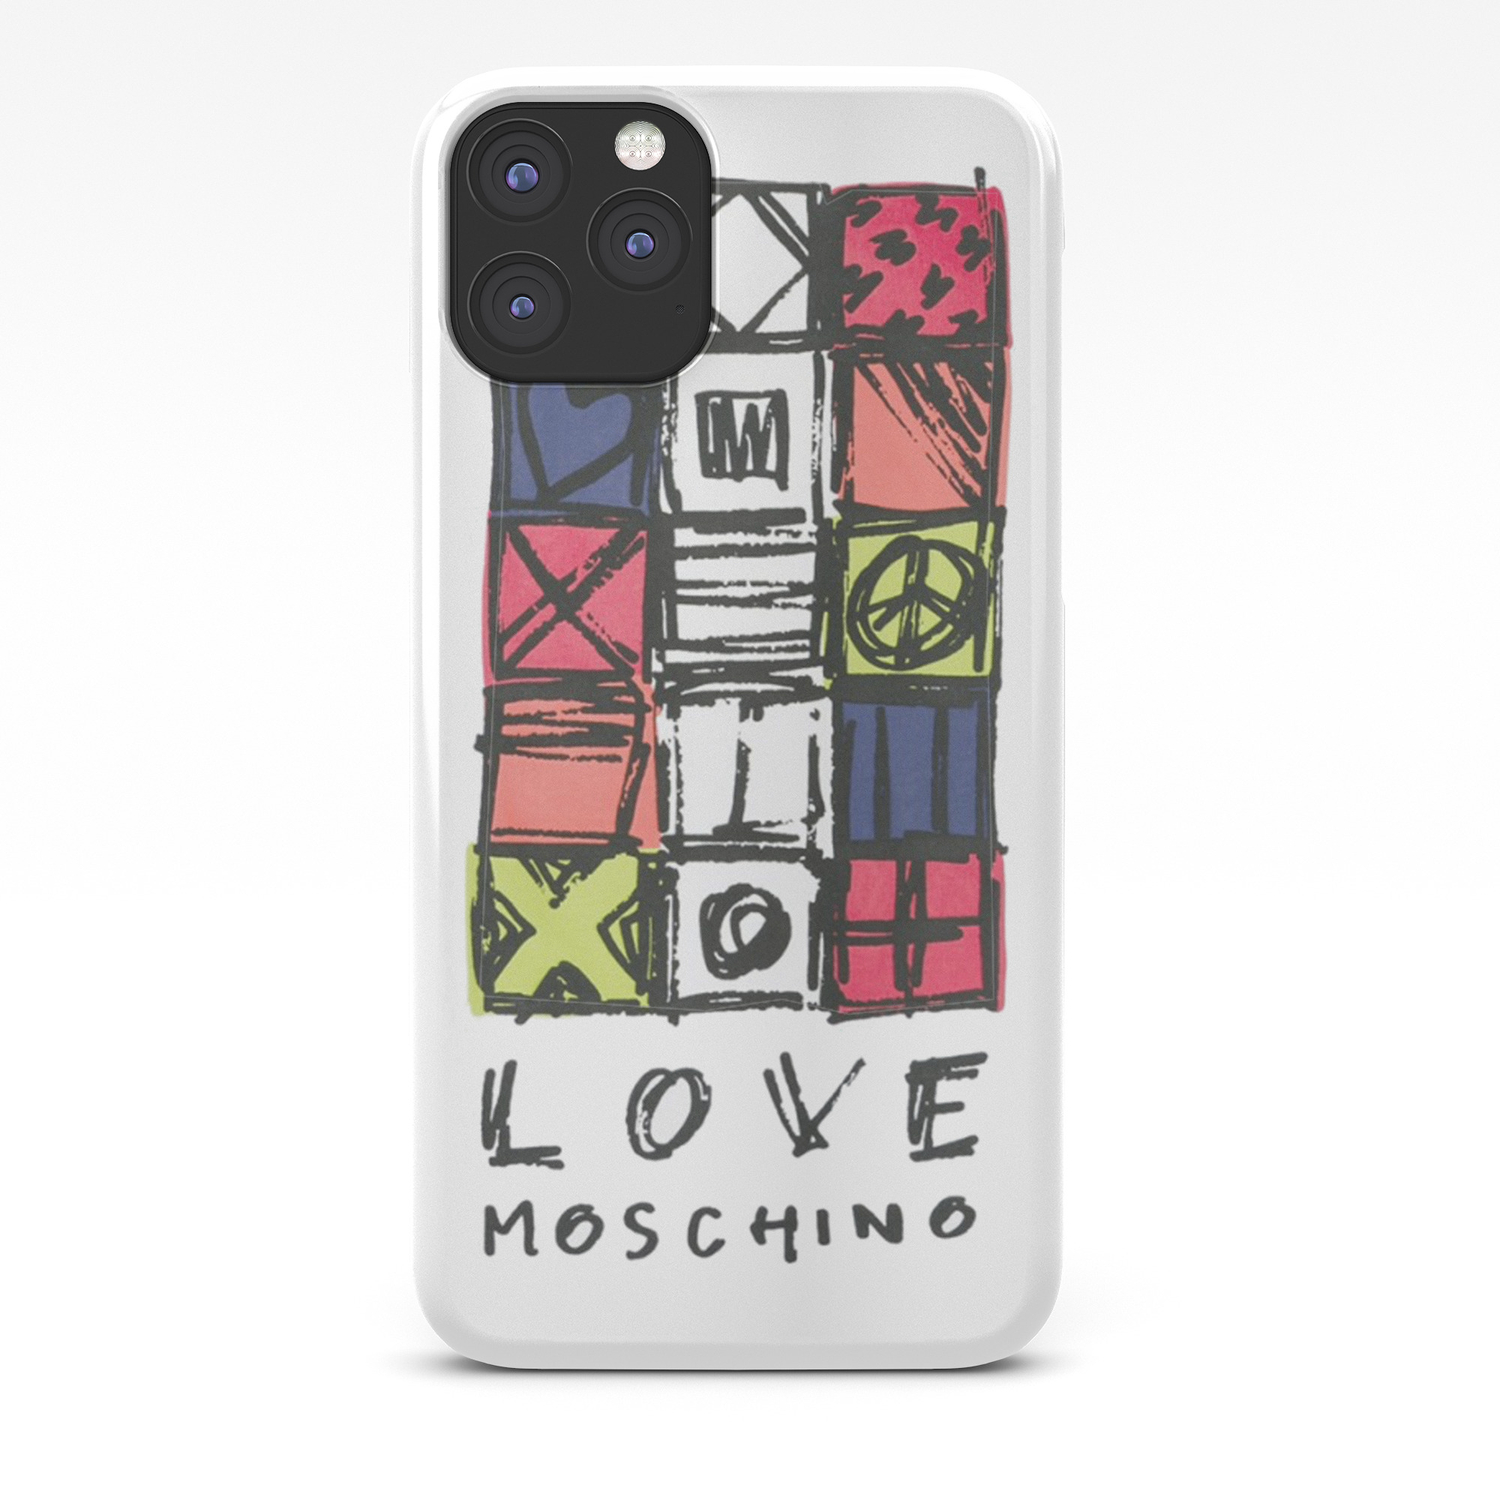 Love Moschin Moschino New Fashion Art Cute Style Trend Kenzo 18 19 Color Mixed Shirt Cover Iphone Case By Abllo Society6